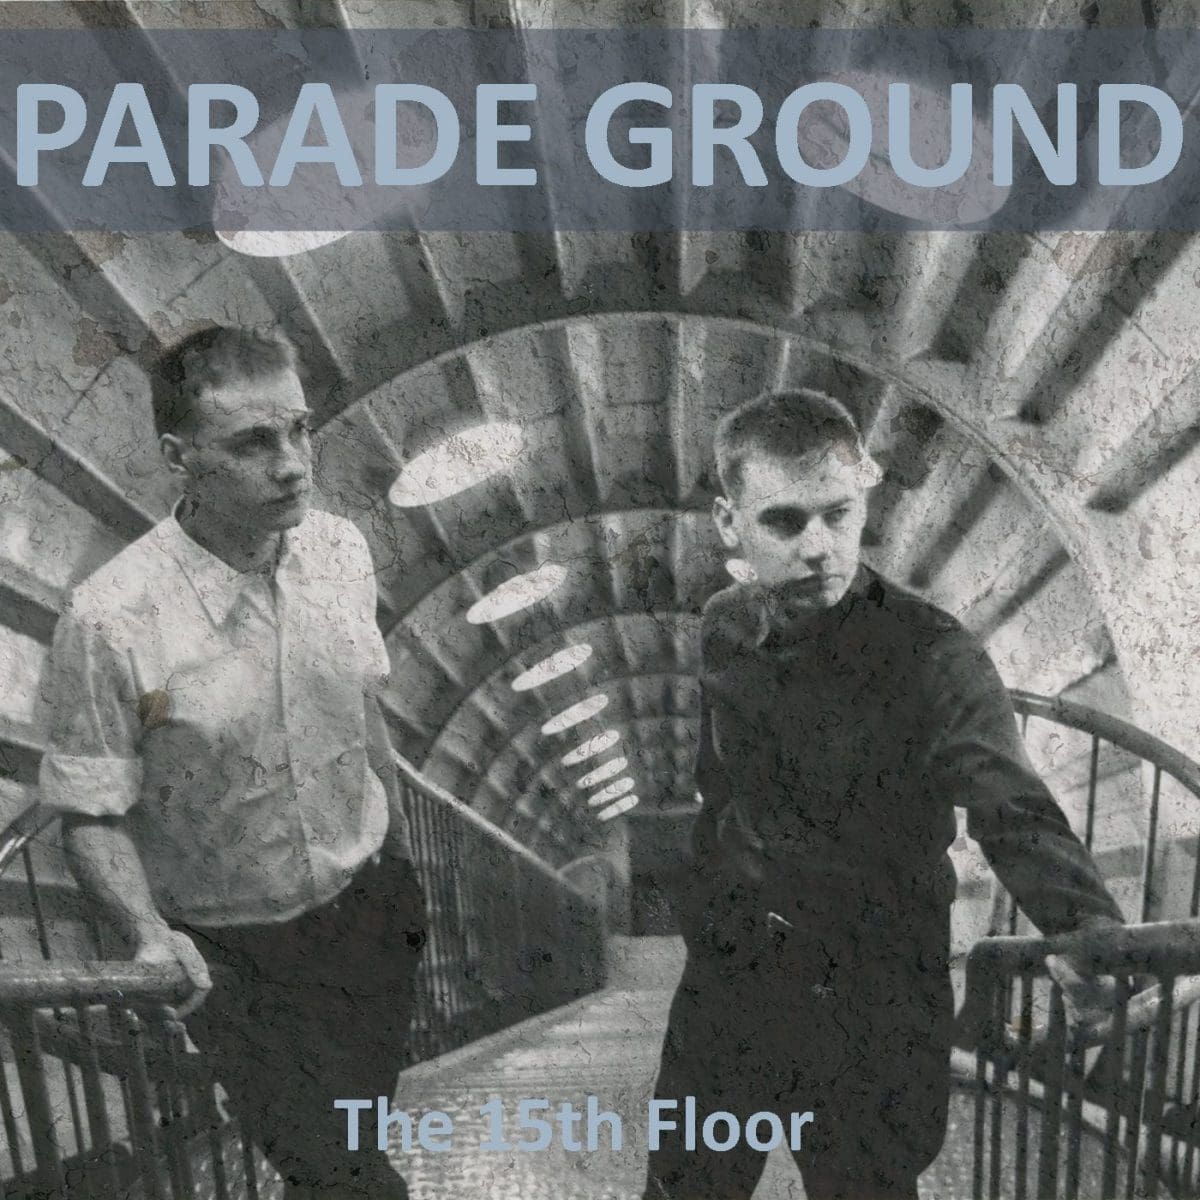 Belgian electro pioneers Parade Ground see 1989 album 'The 15th Floor' finally released on CD